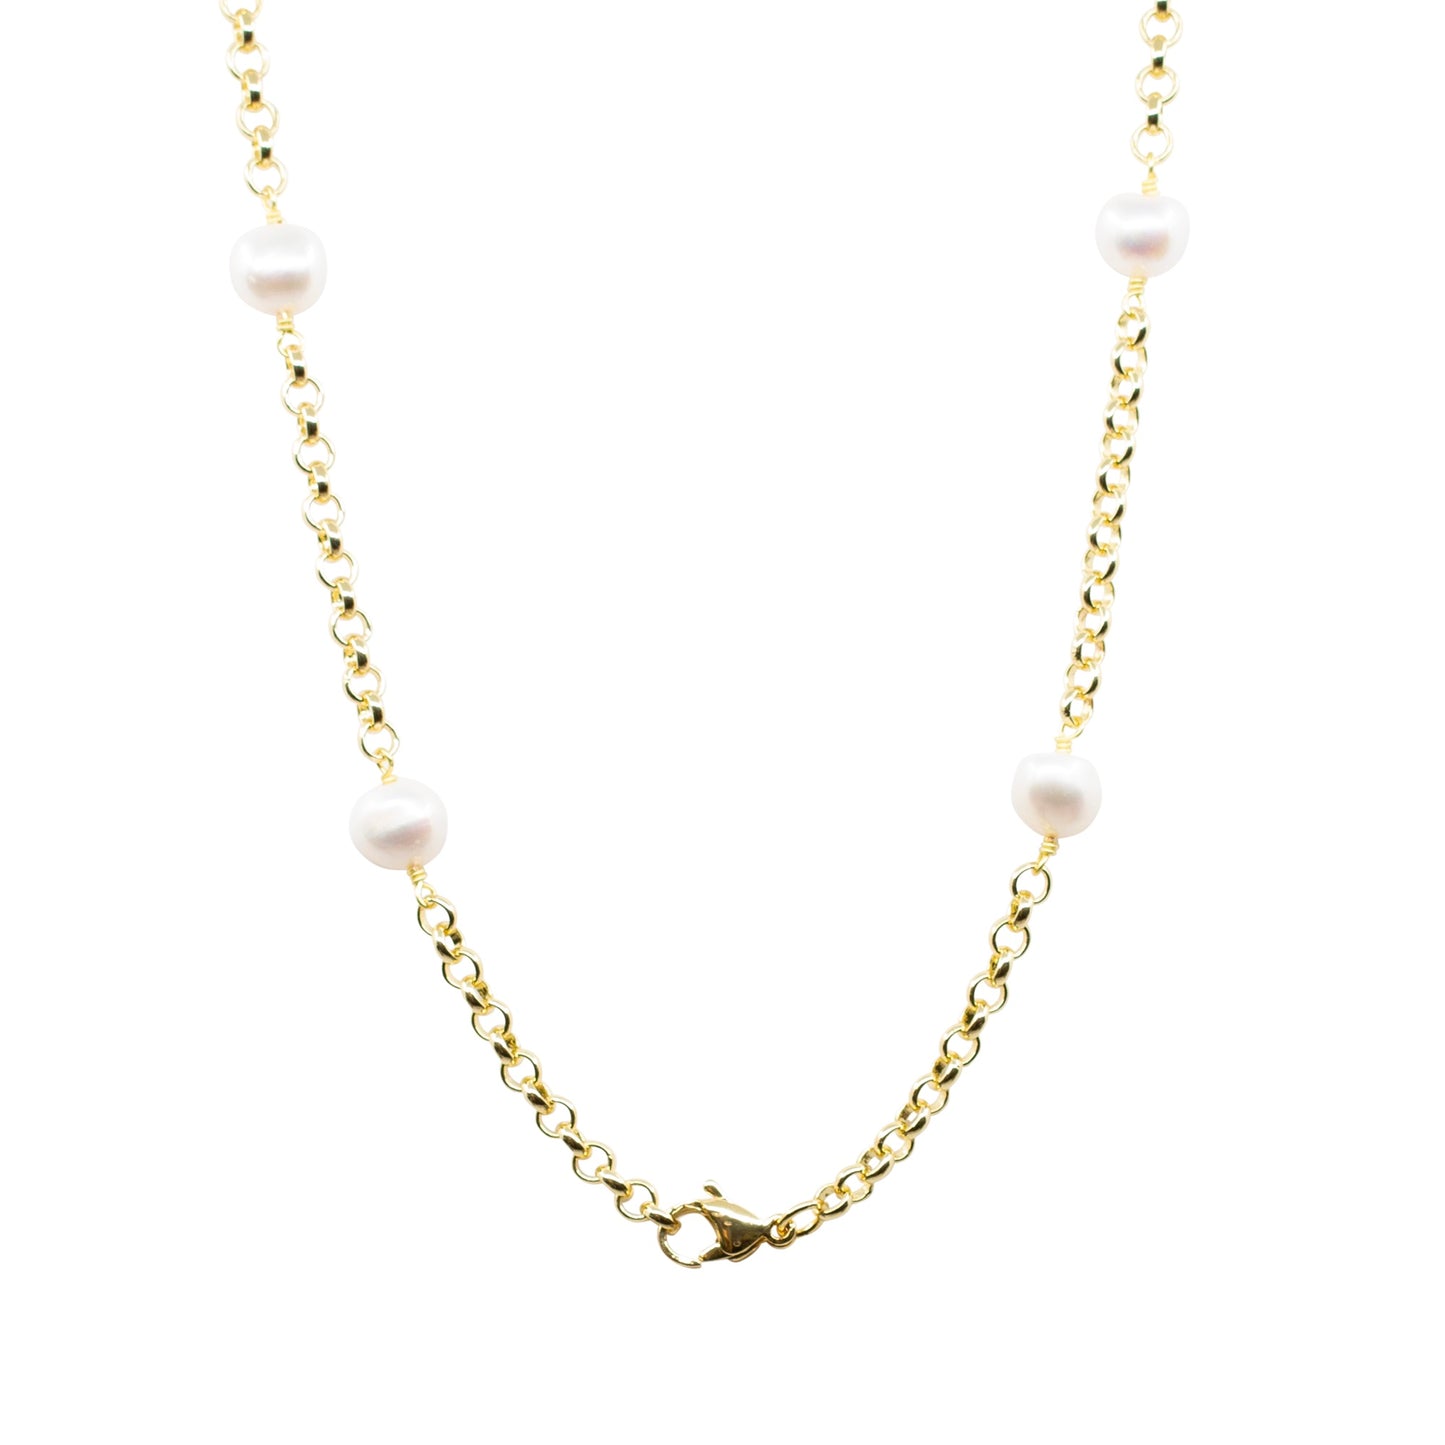 Rhoda - Gold-Tone Chain and Freshwater Pearl Necklace No